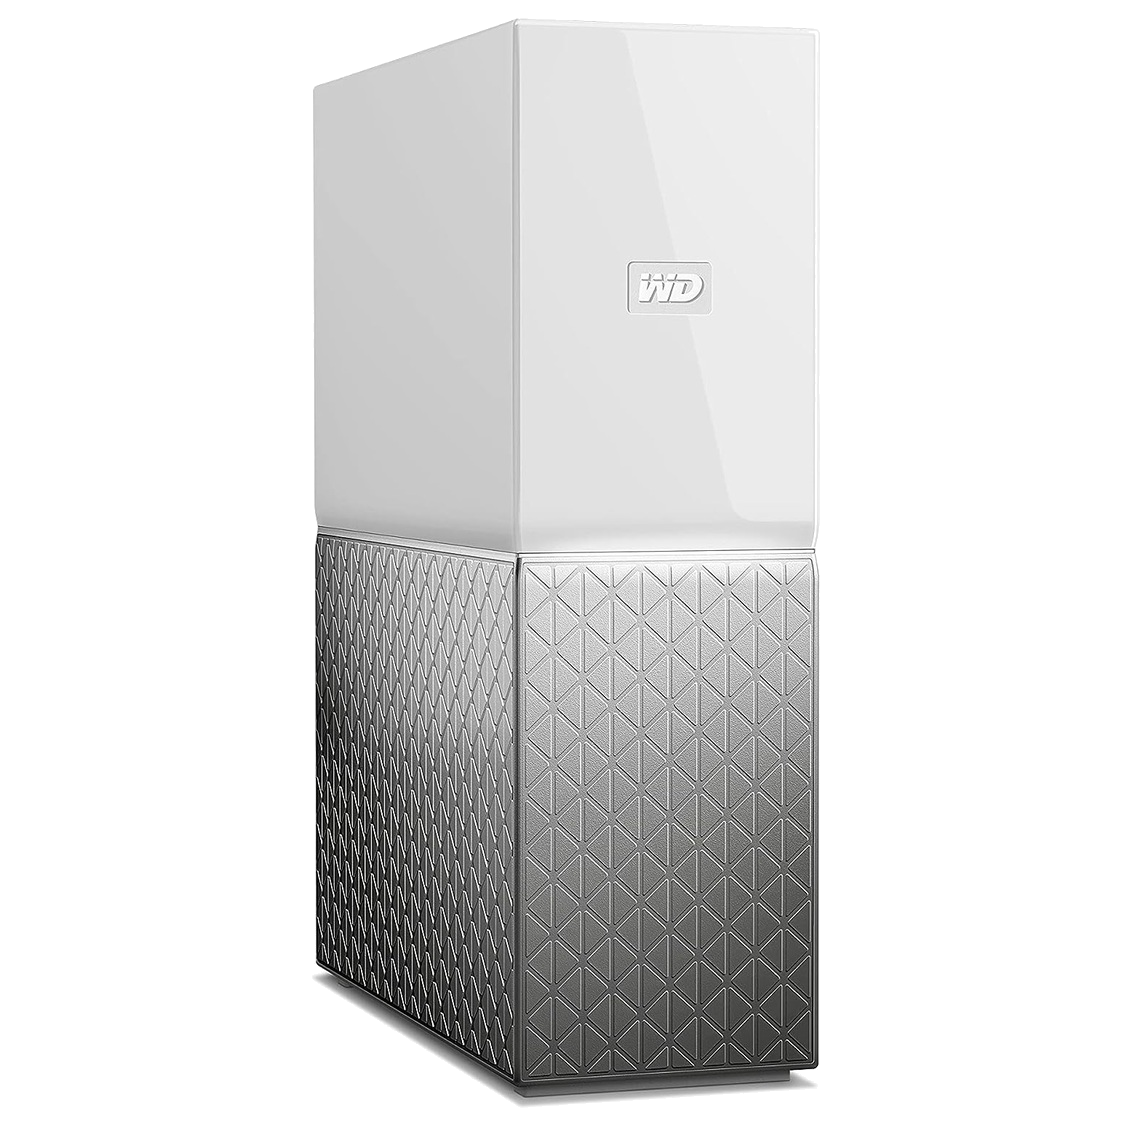 Image showing the WD 4TB My Cloud Home Personal Cloud in white